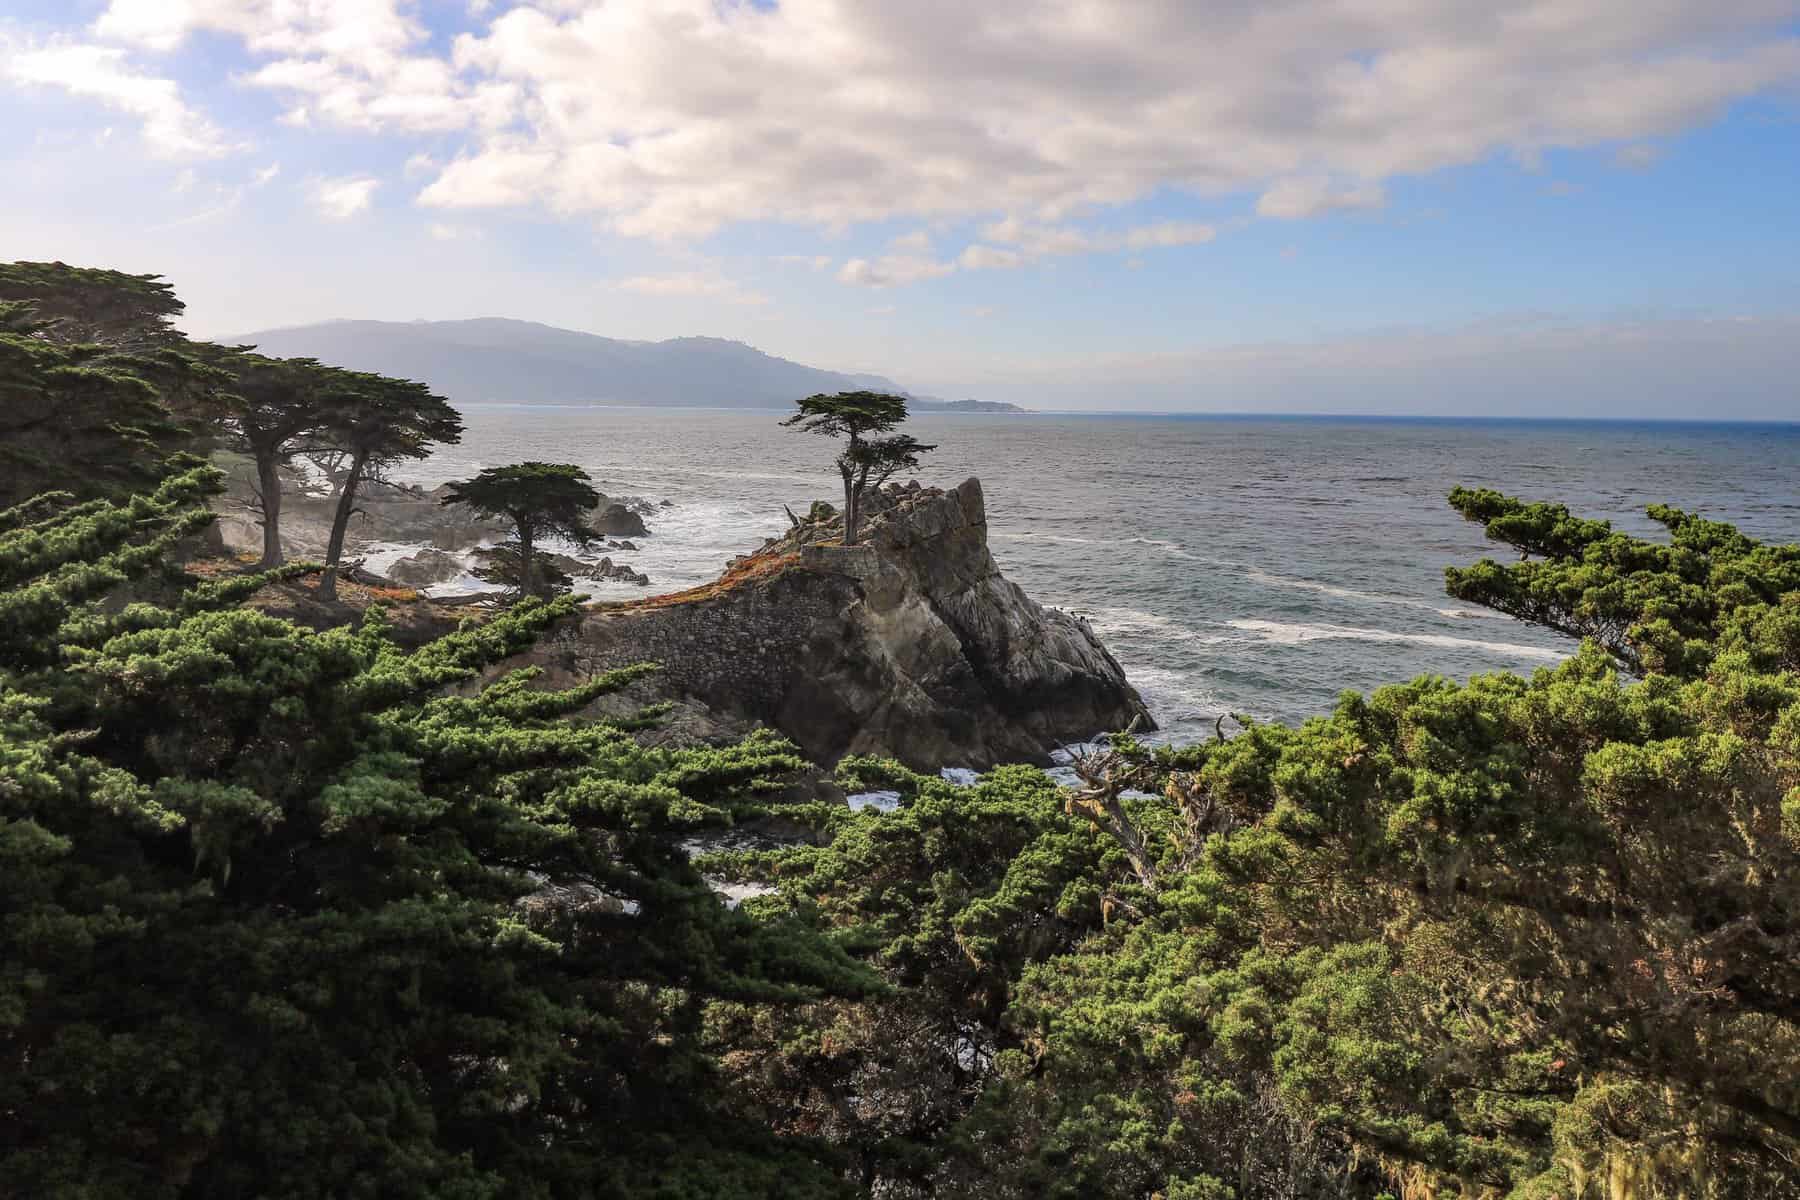 The beautiful and famous Lone Cypress Tree